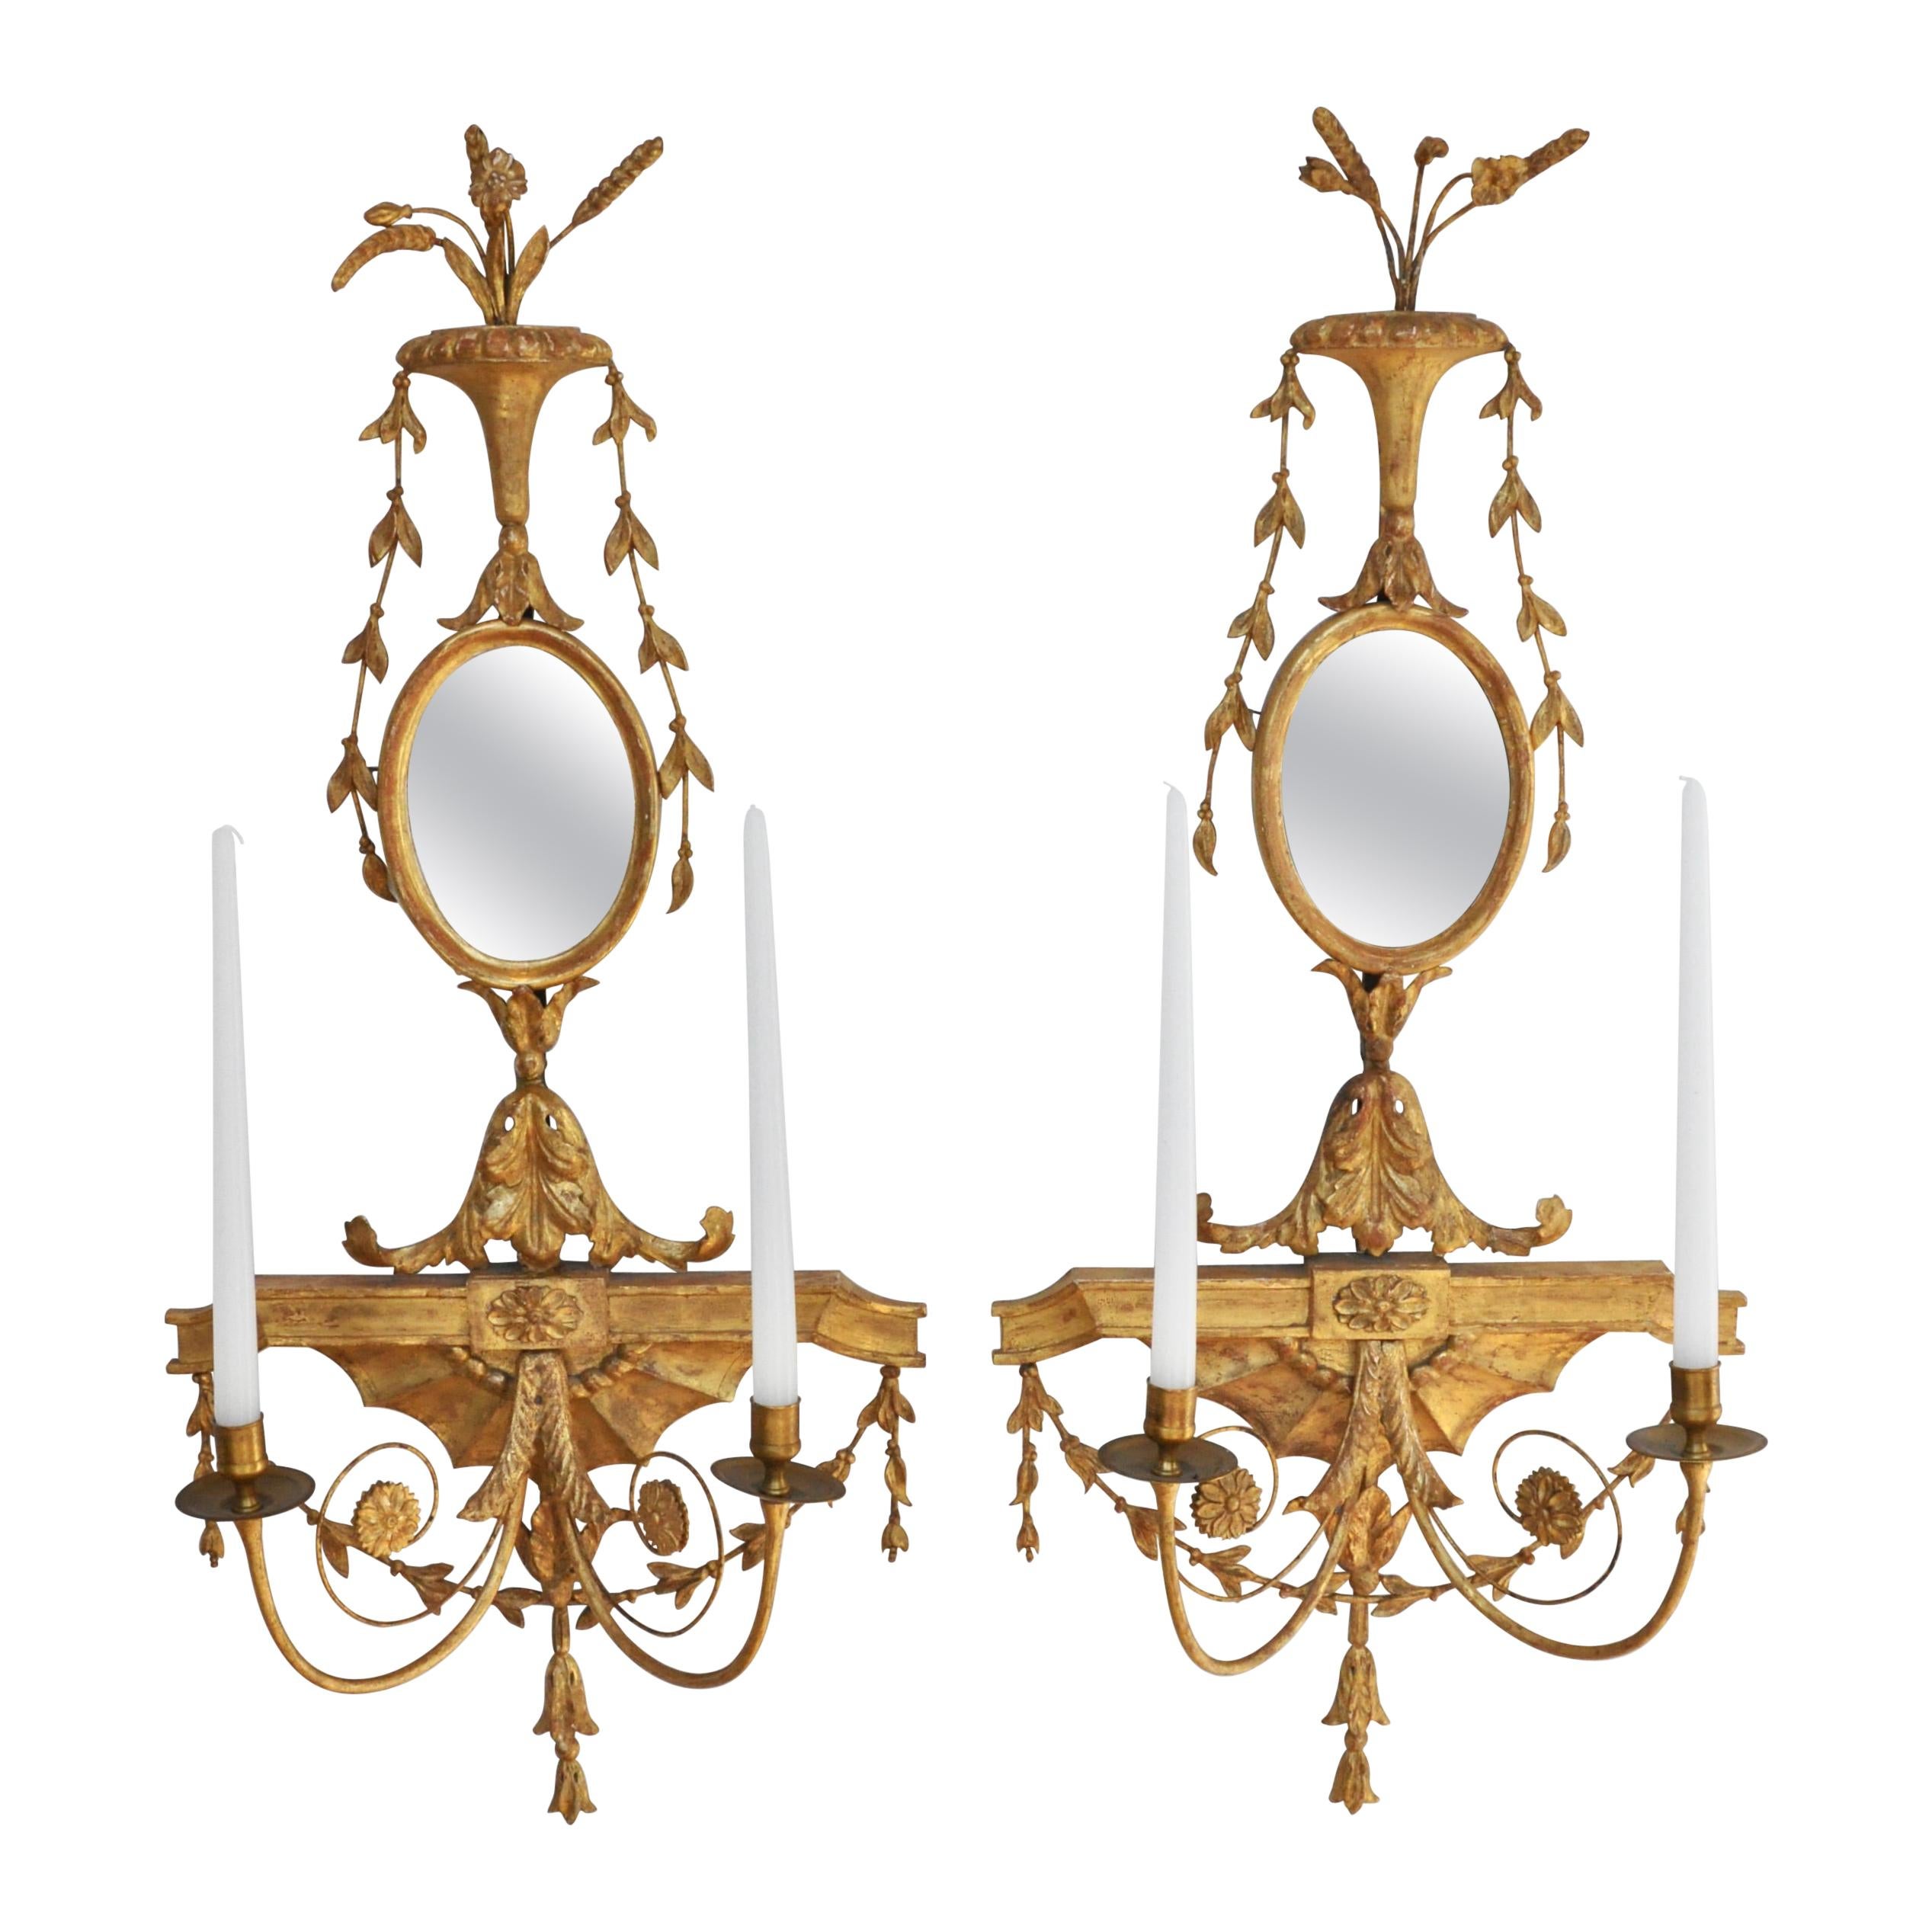 Pair of Early 19th Century Adam George III Giltwood Sconces